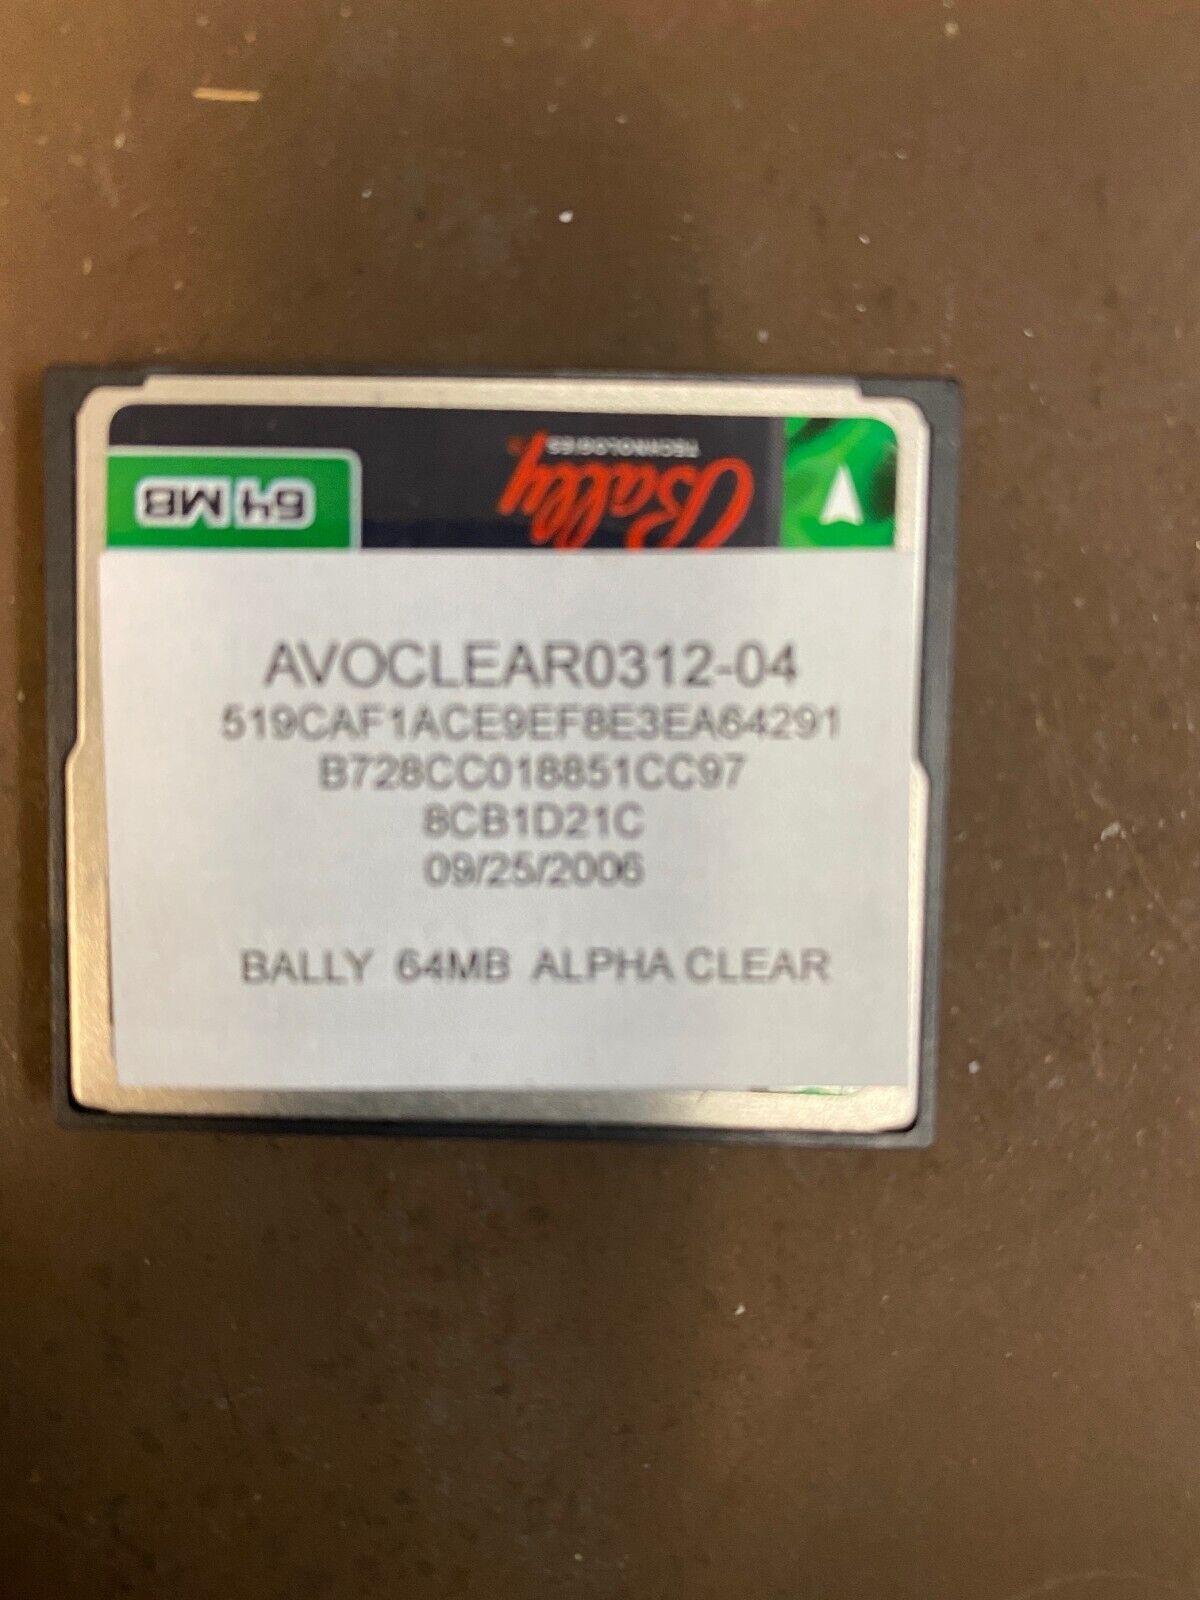 Bally S9000 Alpha clear chip software